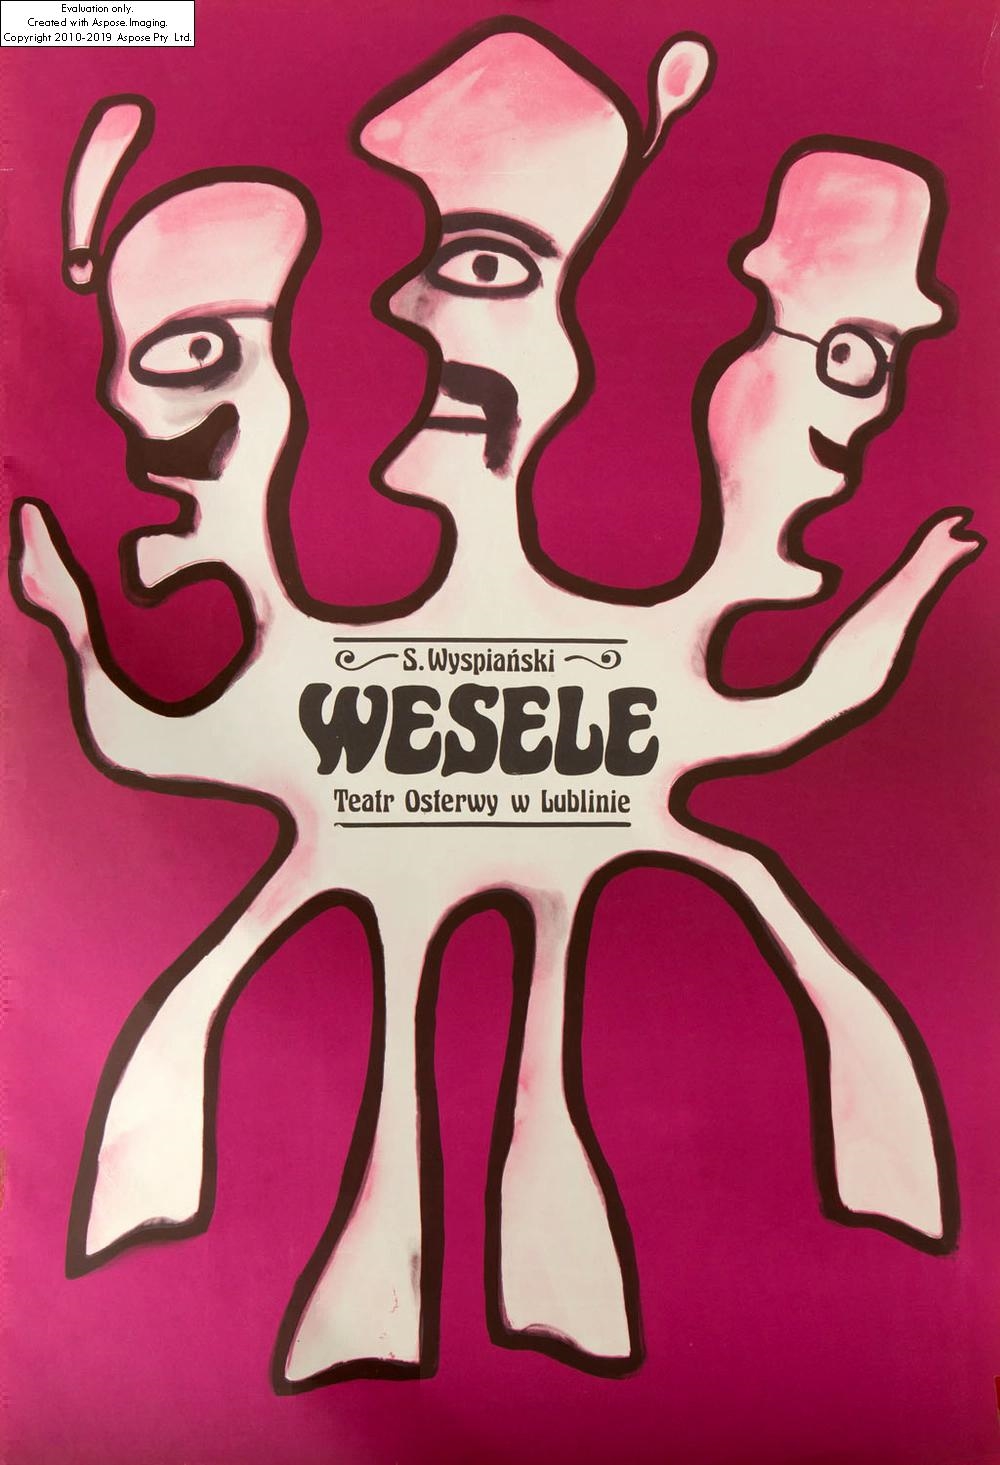 Poster for the play "Wesele" by Jan Lenica, 1974